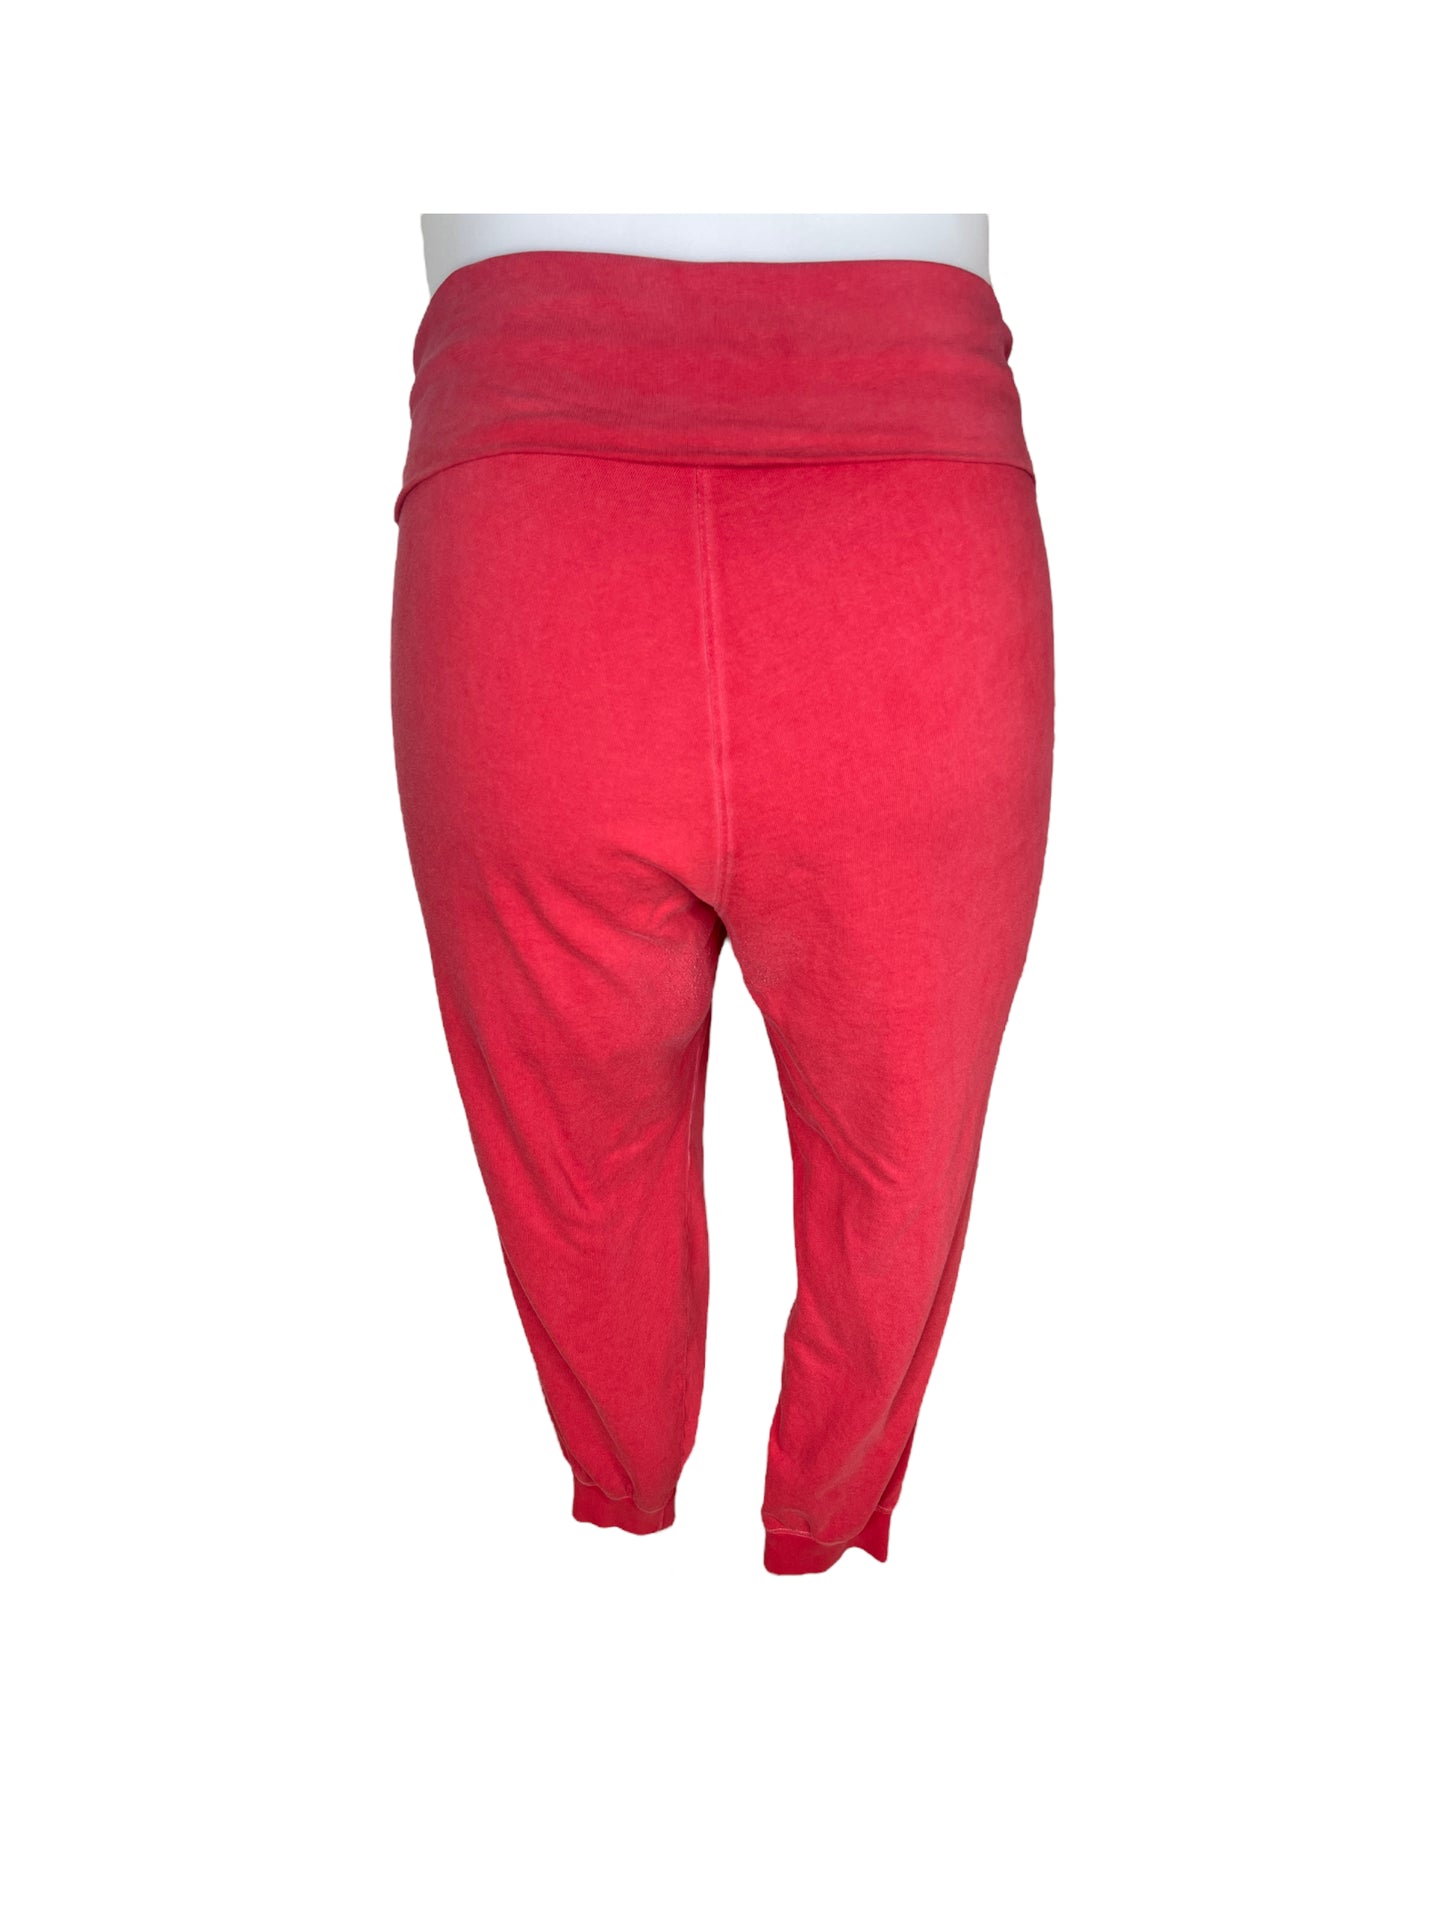 “Old Navy” Red Maternity Pants (XXL)